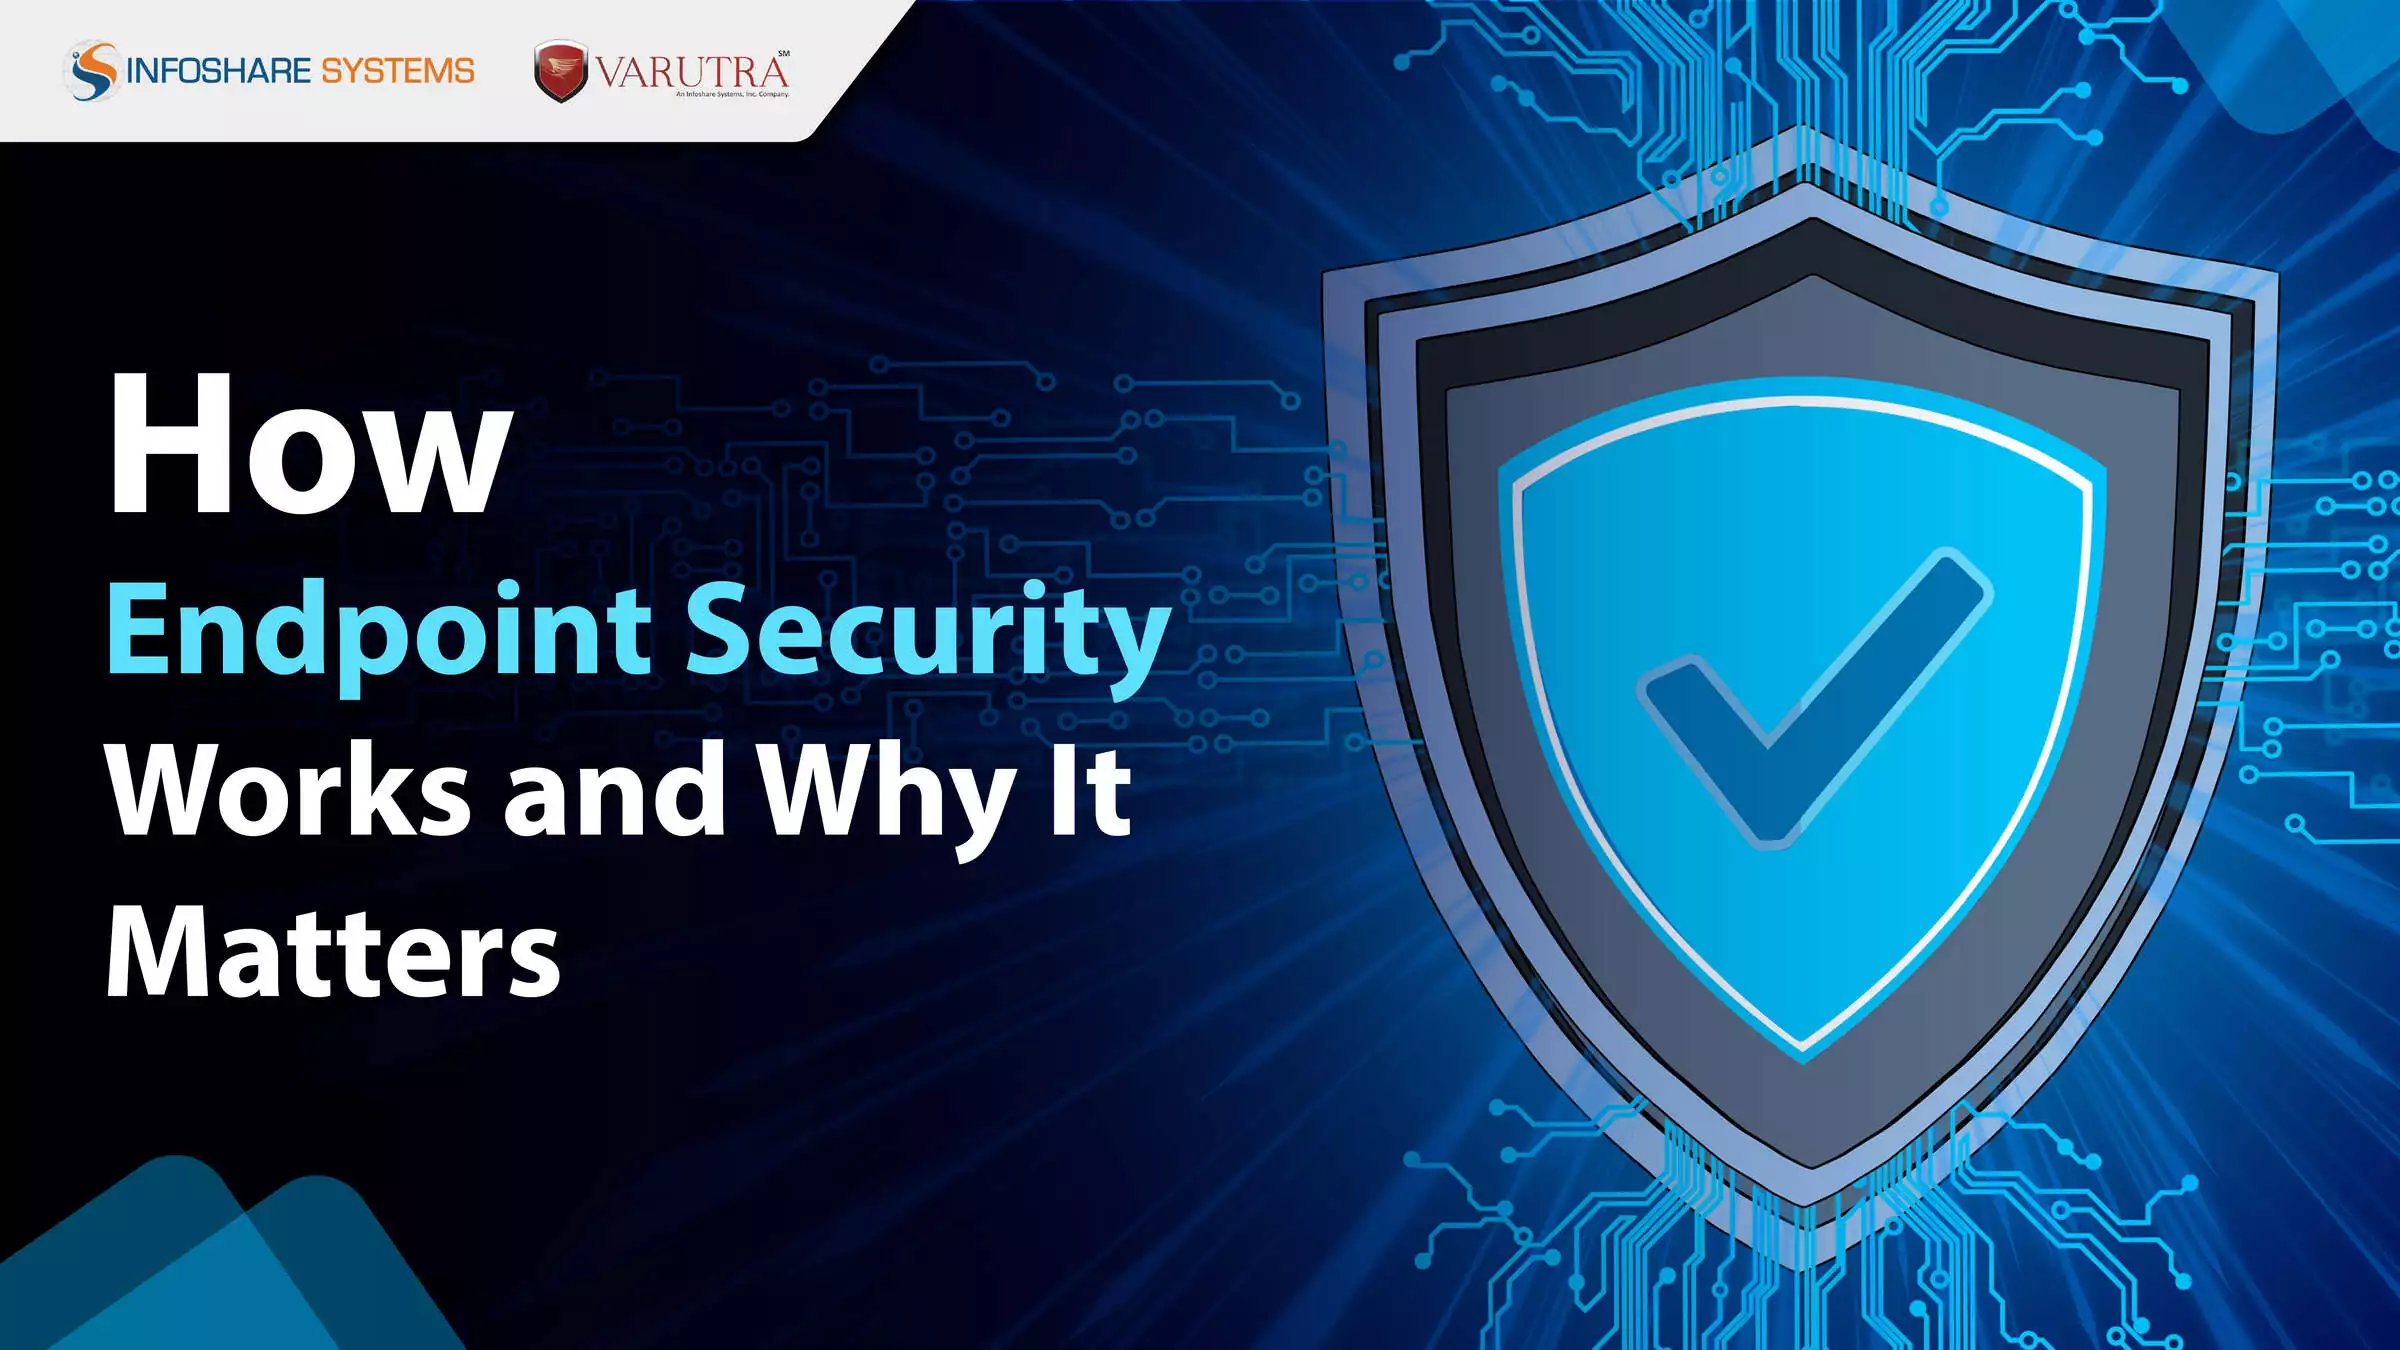 Endpoint Security 360 A Holistic Approach to Protecting Your Business Endpoint Security 360 A Holistic Approach to Protecting Your Business Endpoint Security A Holistic Approach to Protecting Your Business